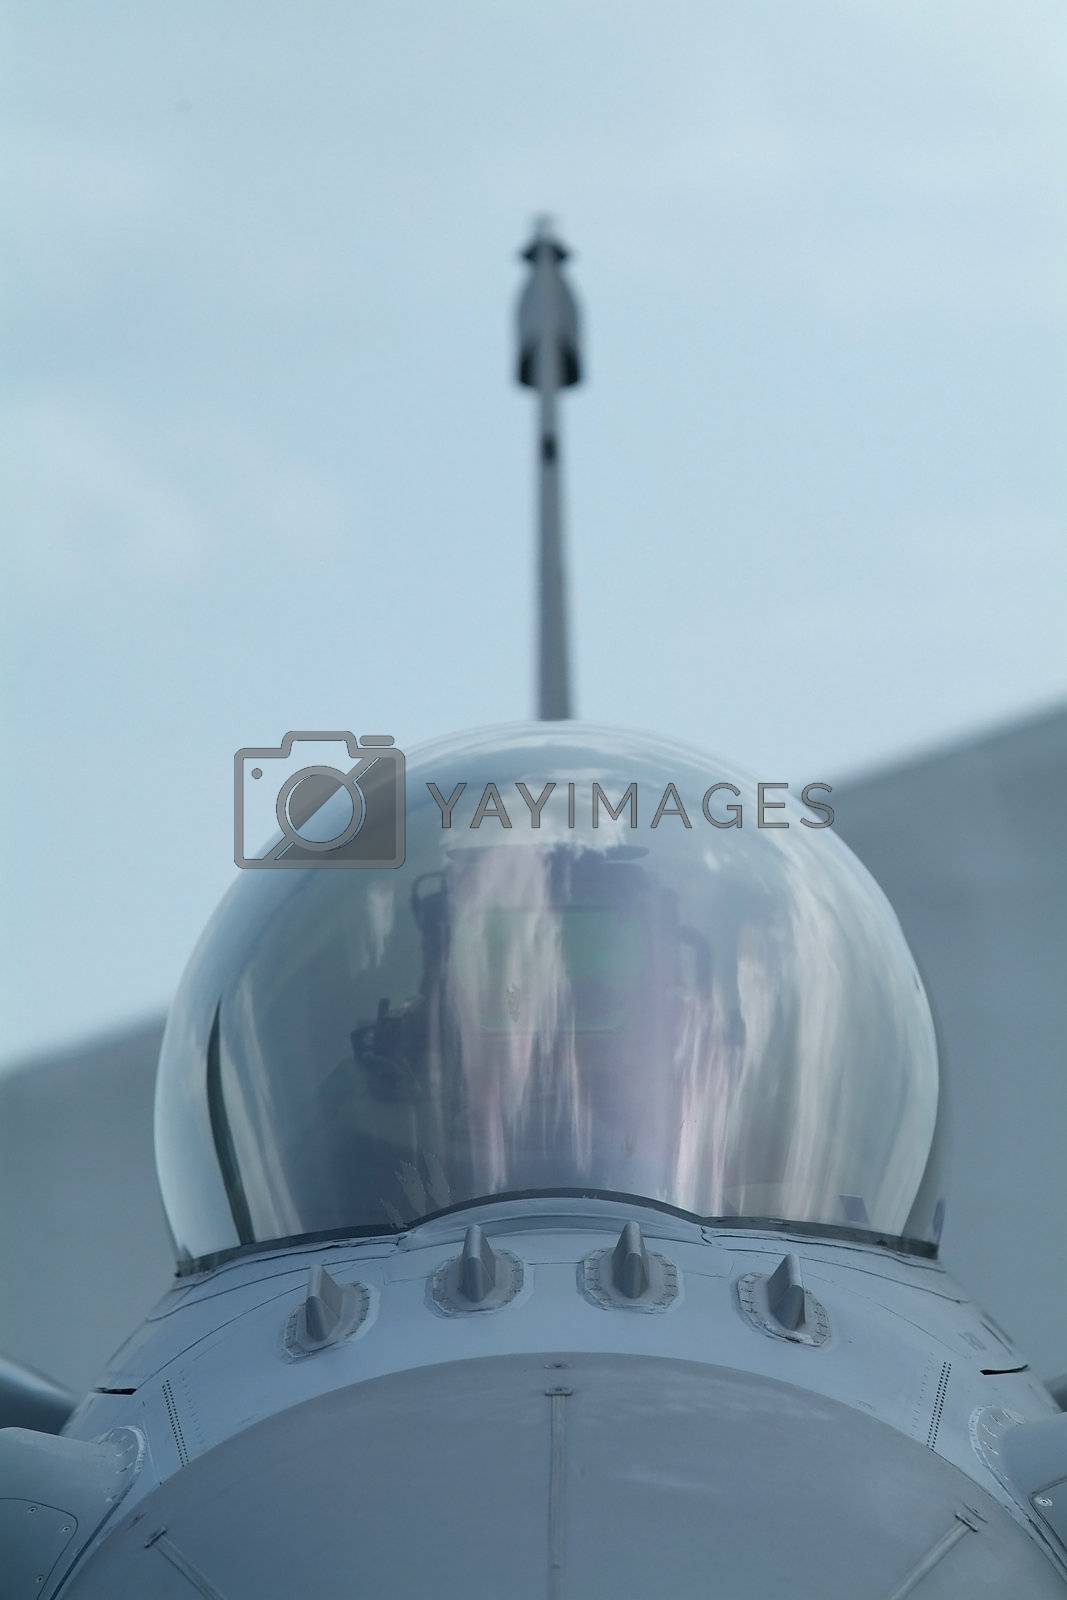 Royalty free image of Cockpit of fighter aircraft by epixx